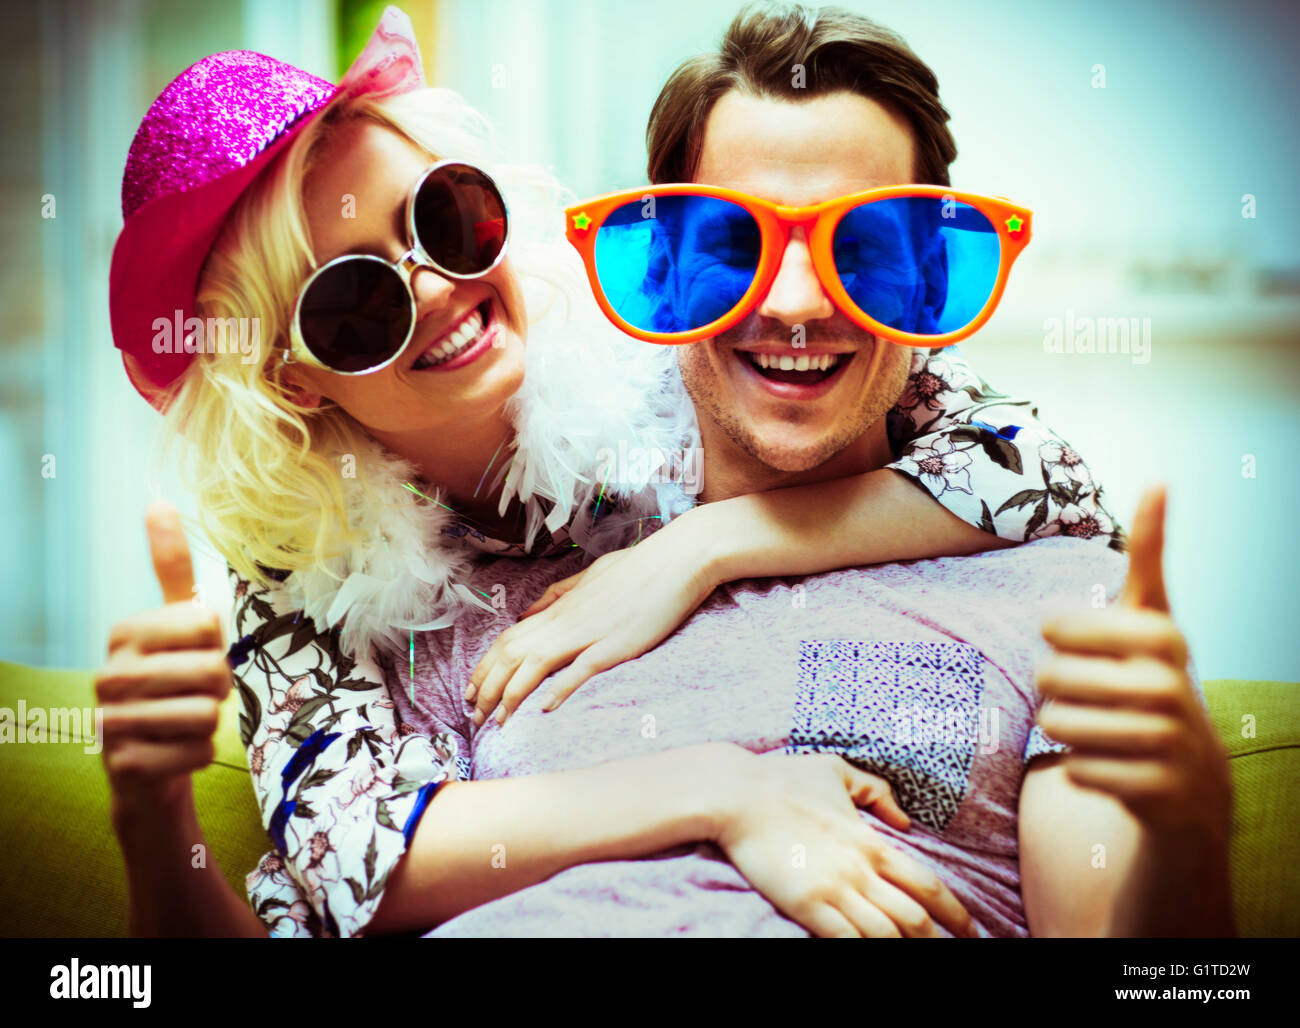 Portrait playful couple wearing costume sunglasses and hat gesturing thumbs-up Stock Photo